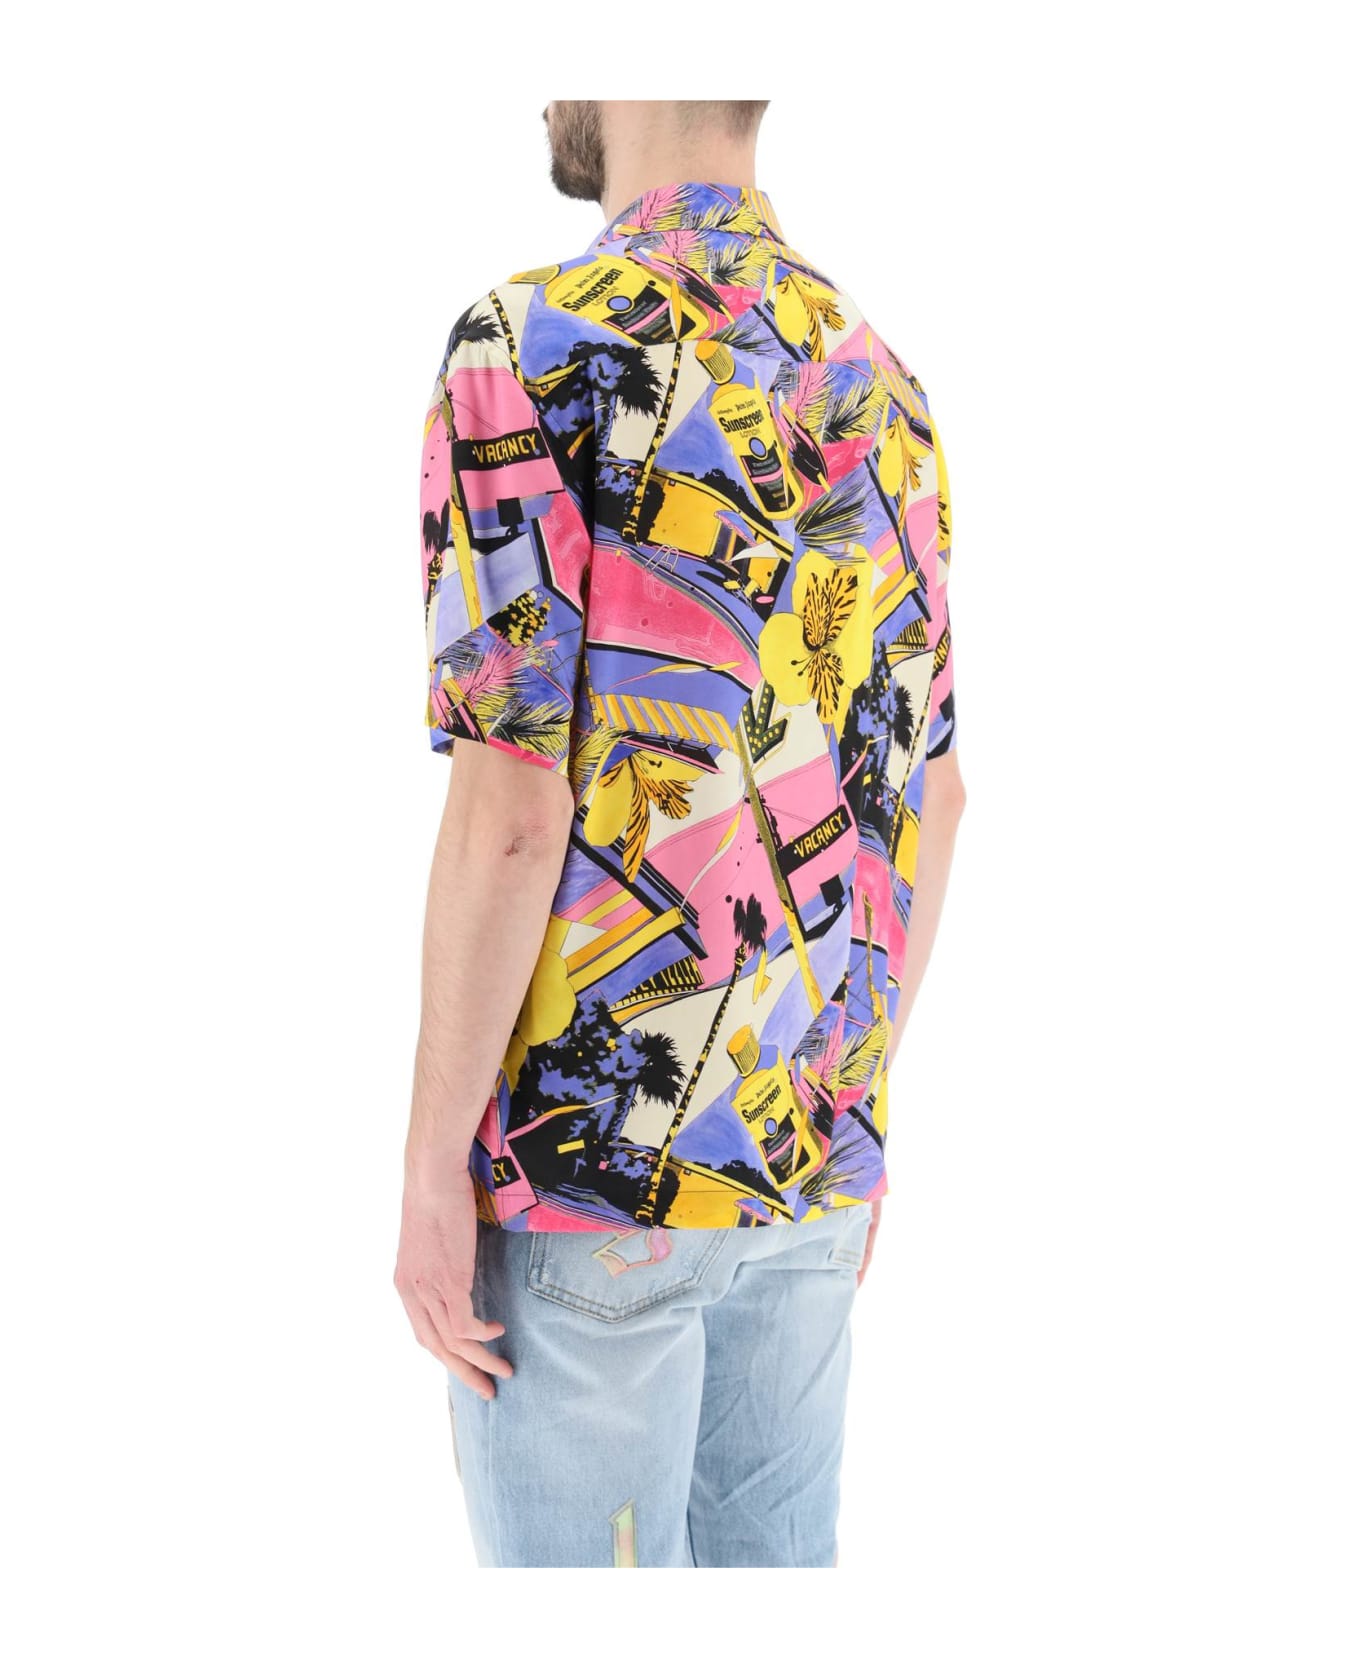 Palm Angels Bowling Style Shirt With Miami Mix Print - MULTICOLORE